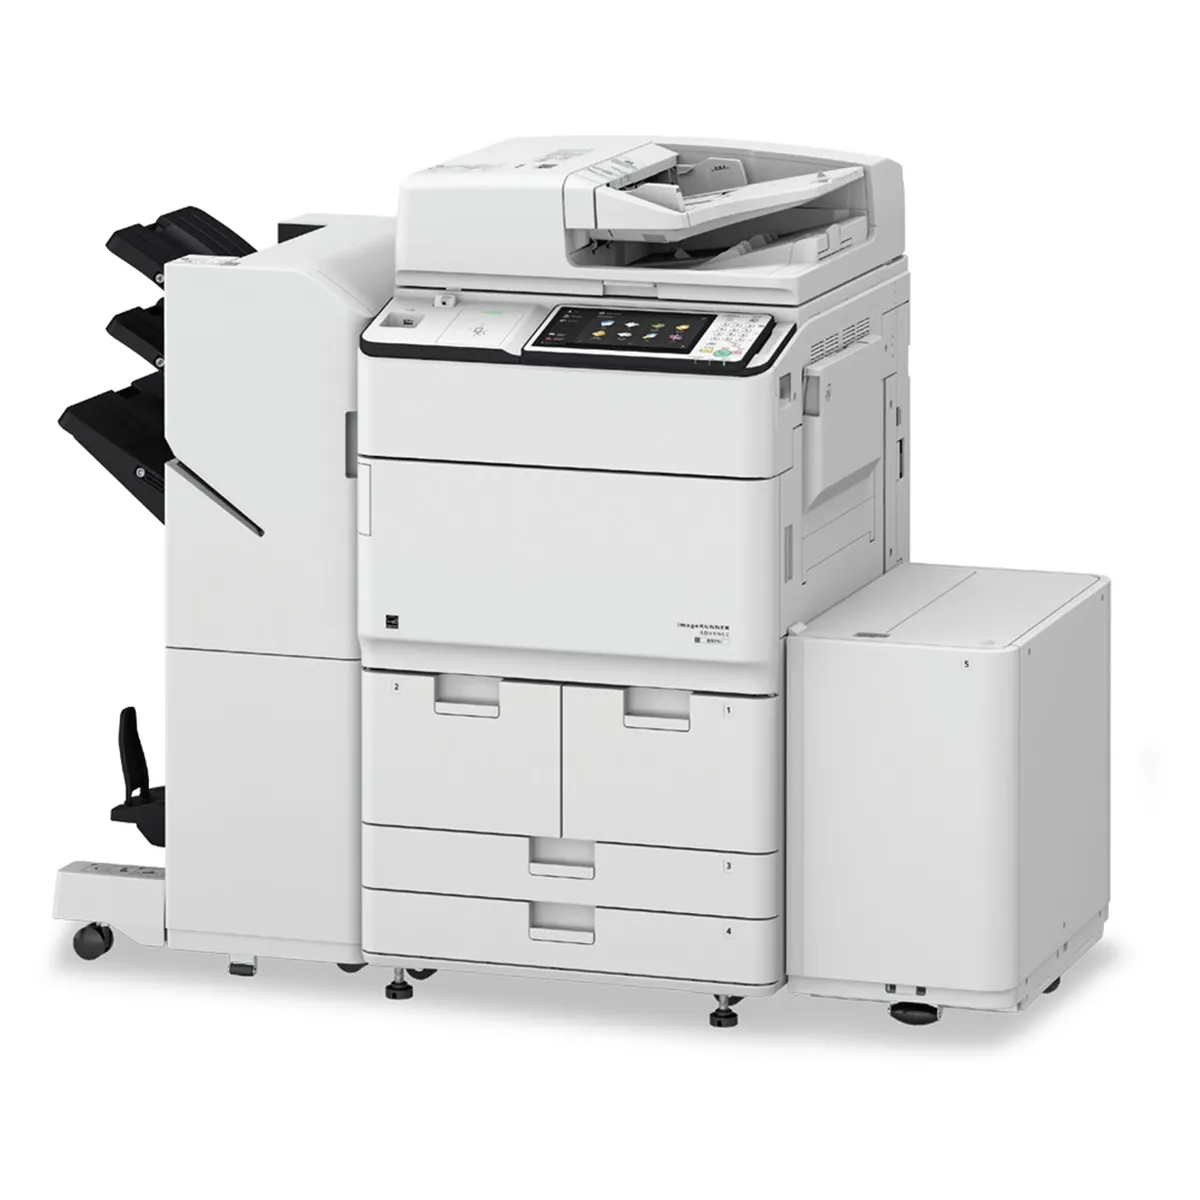 Cost Effective Monochrome Laser A3 Copier for imagerunner 6555 High Yield manufacturer Factory Photocopier machine